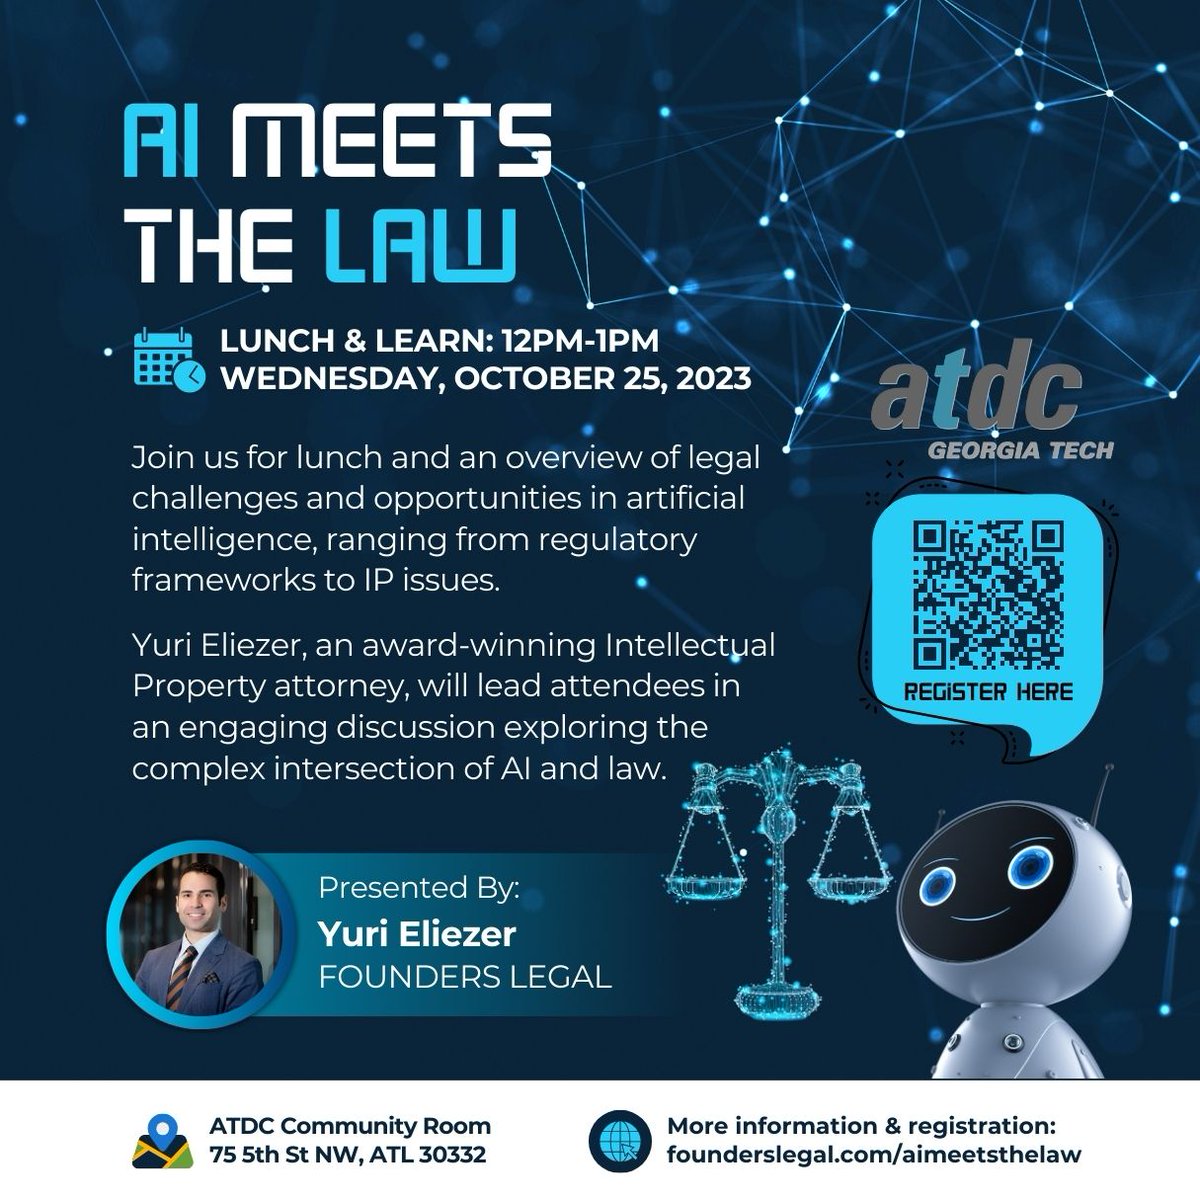 Join us Wed 10/25 @atdc for lunch & an overview of legal challenges & opportunities in AI, ranging from regulatory frameworks to IP issues. Designed for entrepreneurs & founders, this session equips you with the knowledge to navigate the evolving legal landscape of AI.